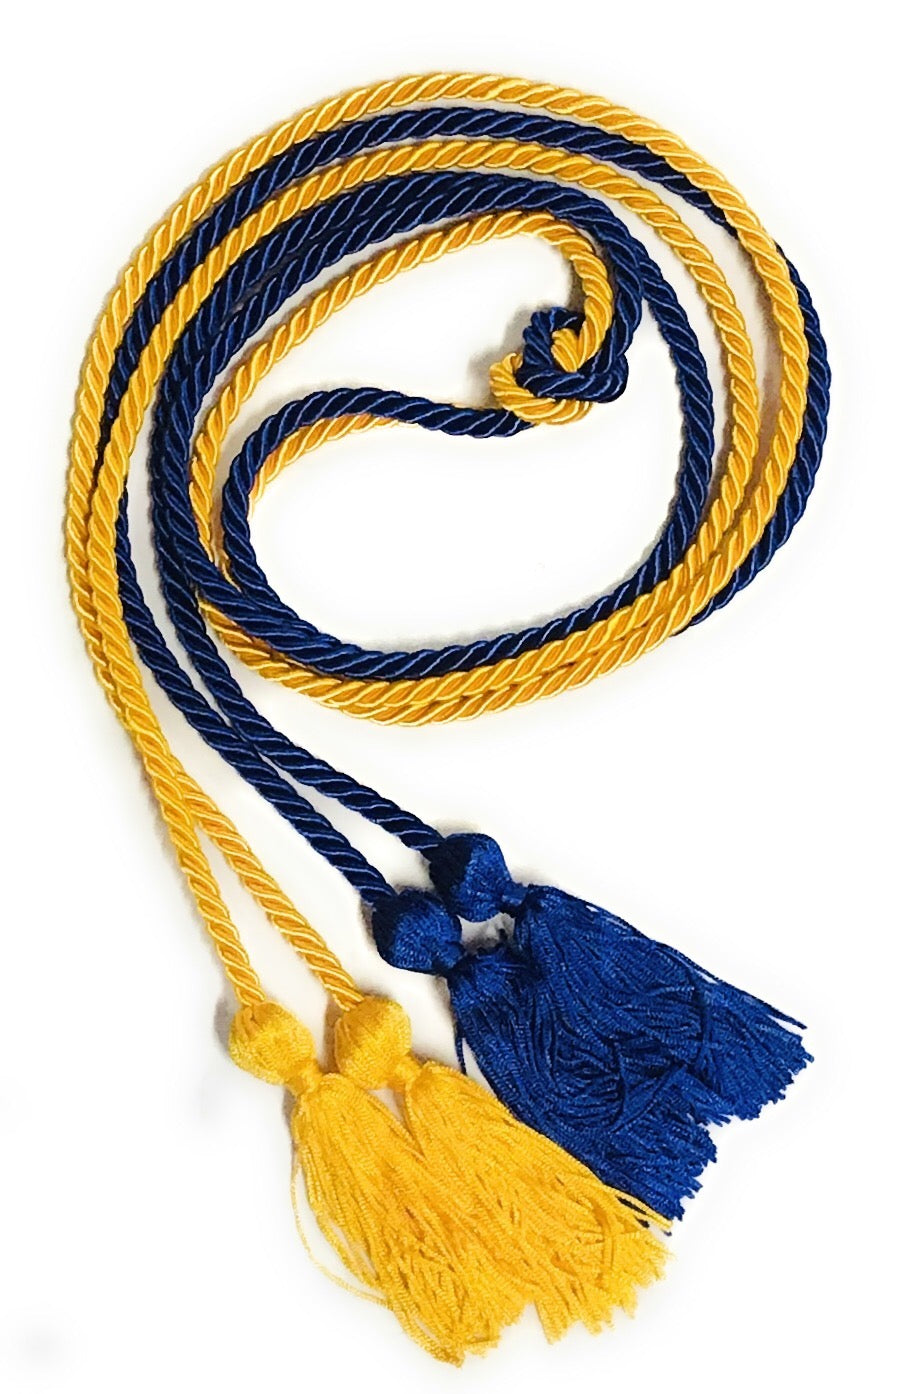 Royal Blue and Gold Graduation Cords – Honor Cord Source